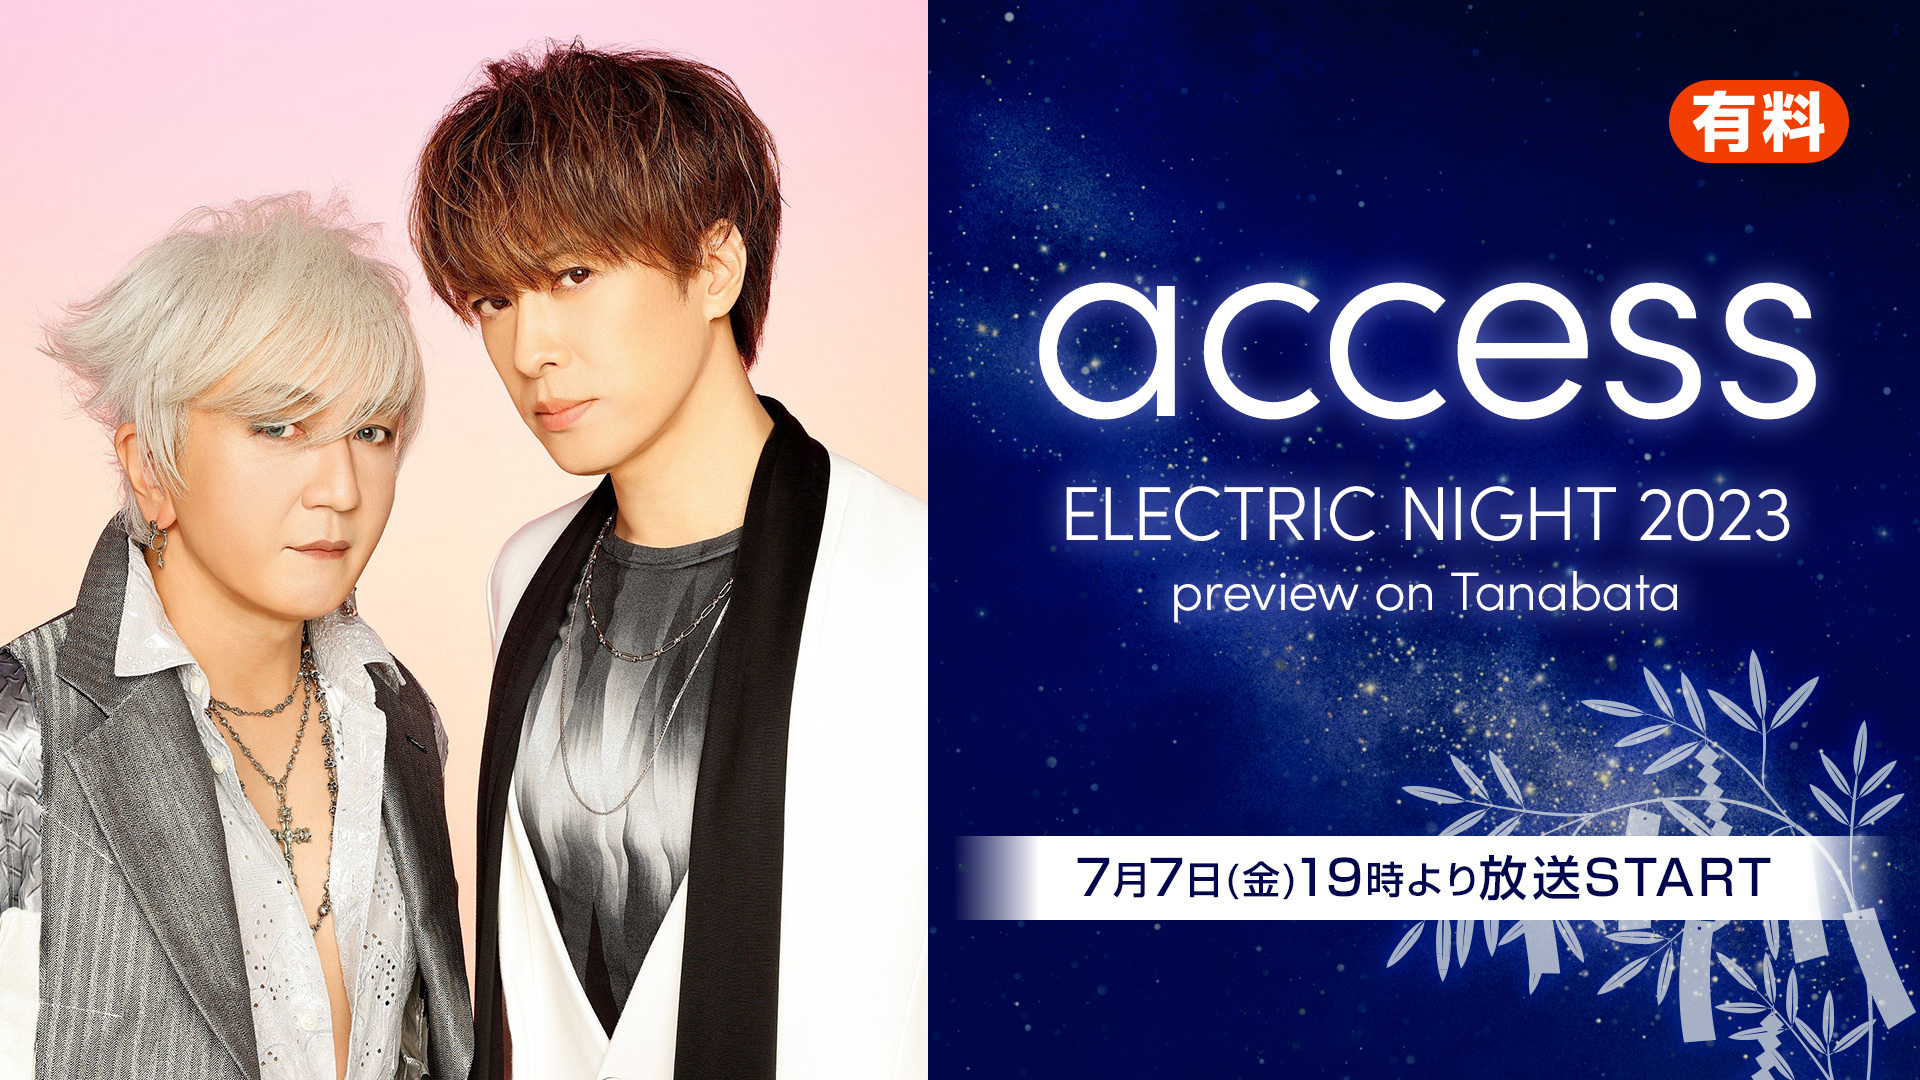 【access ELECTRIC NIGHT 2023】 preview on Tanabata